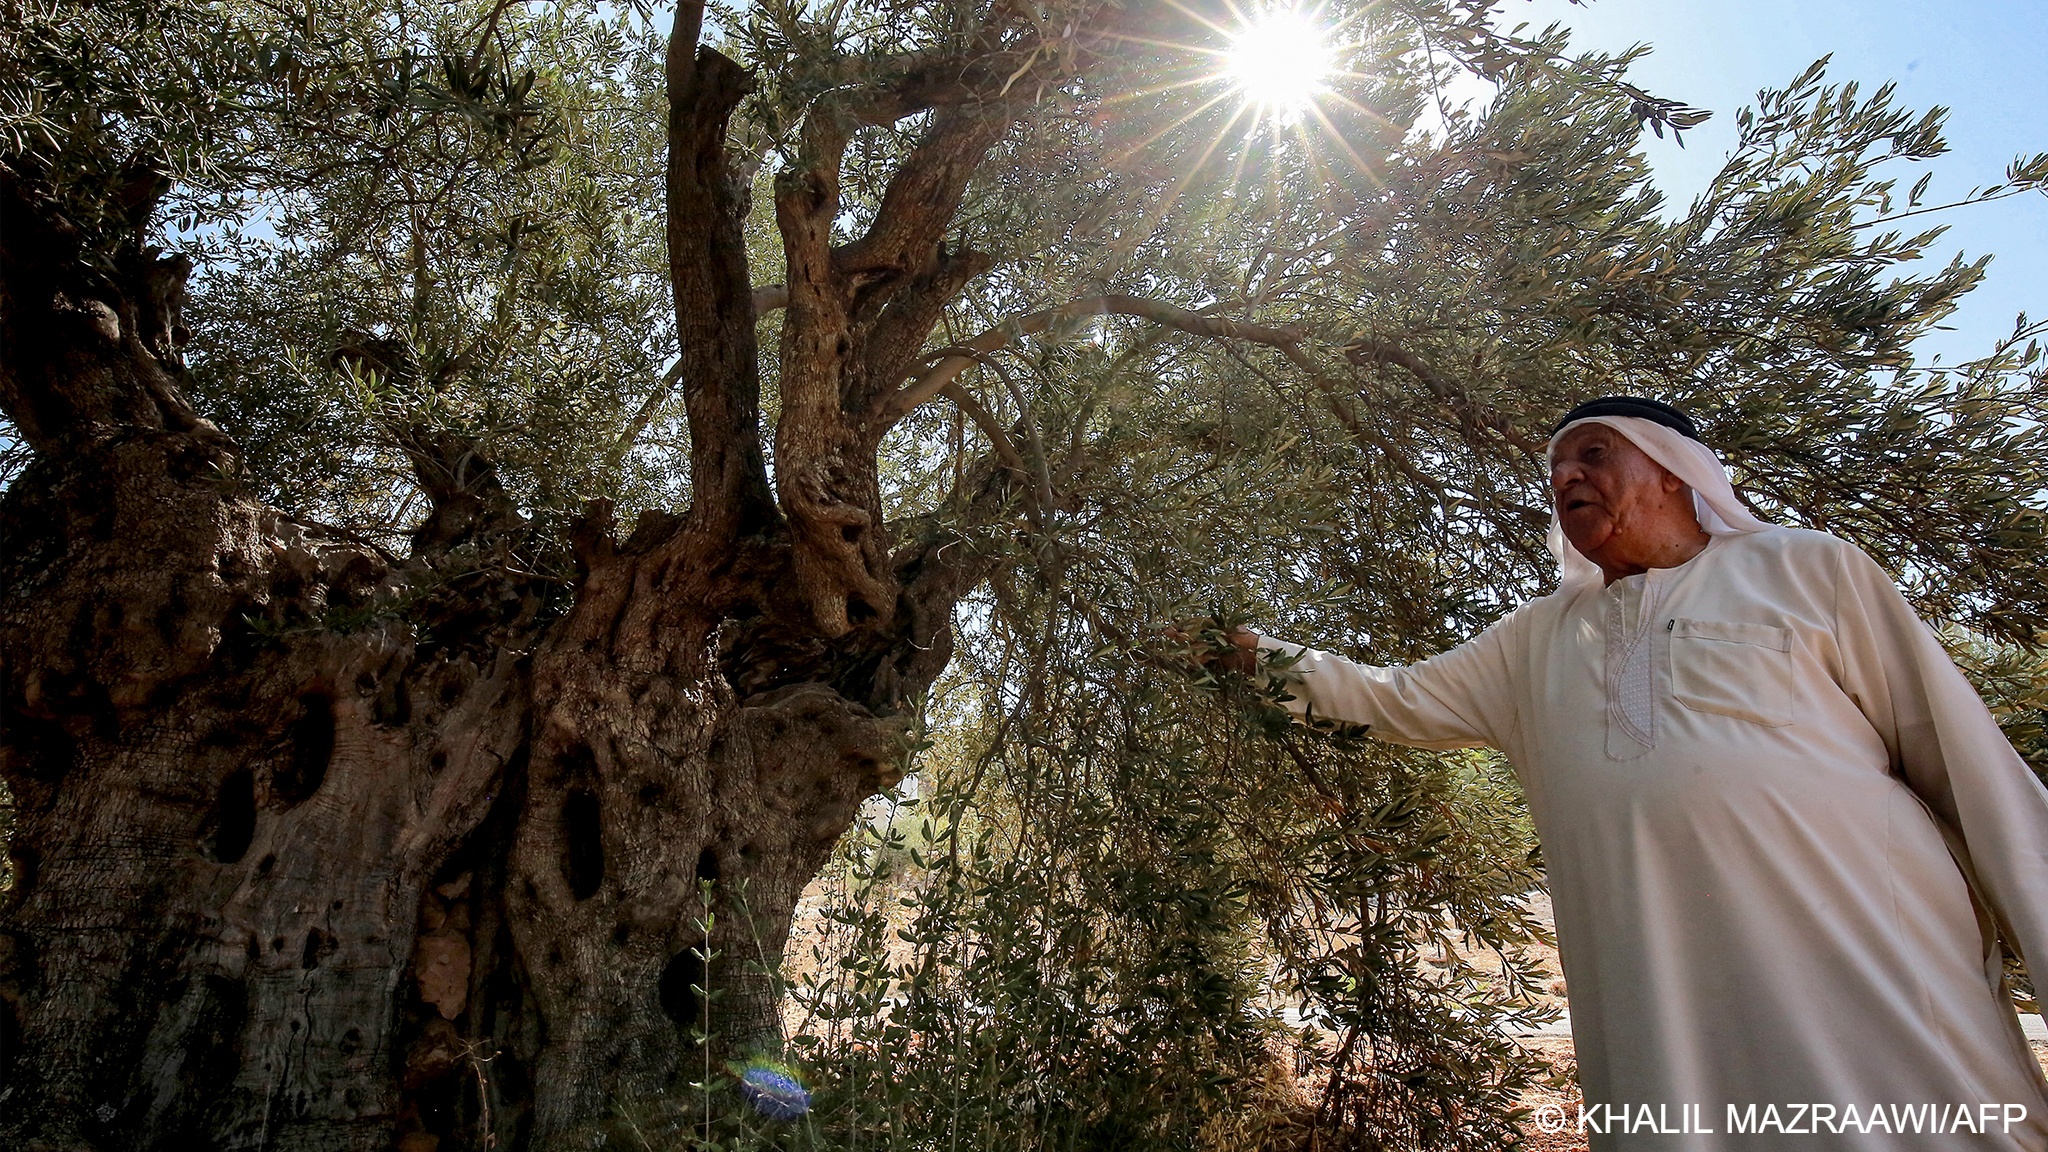 As the sun shines through the leaves of an olive tree with a very wide and gnarly trunk, Jordanian farmer Ali Saleh Atta looks at the tree as he holds one of its branches